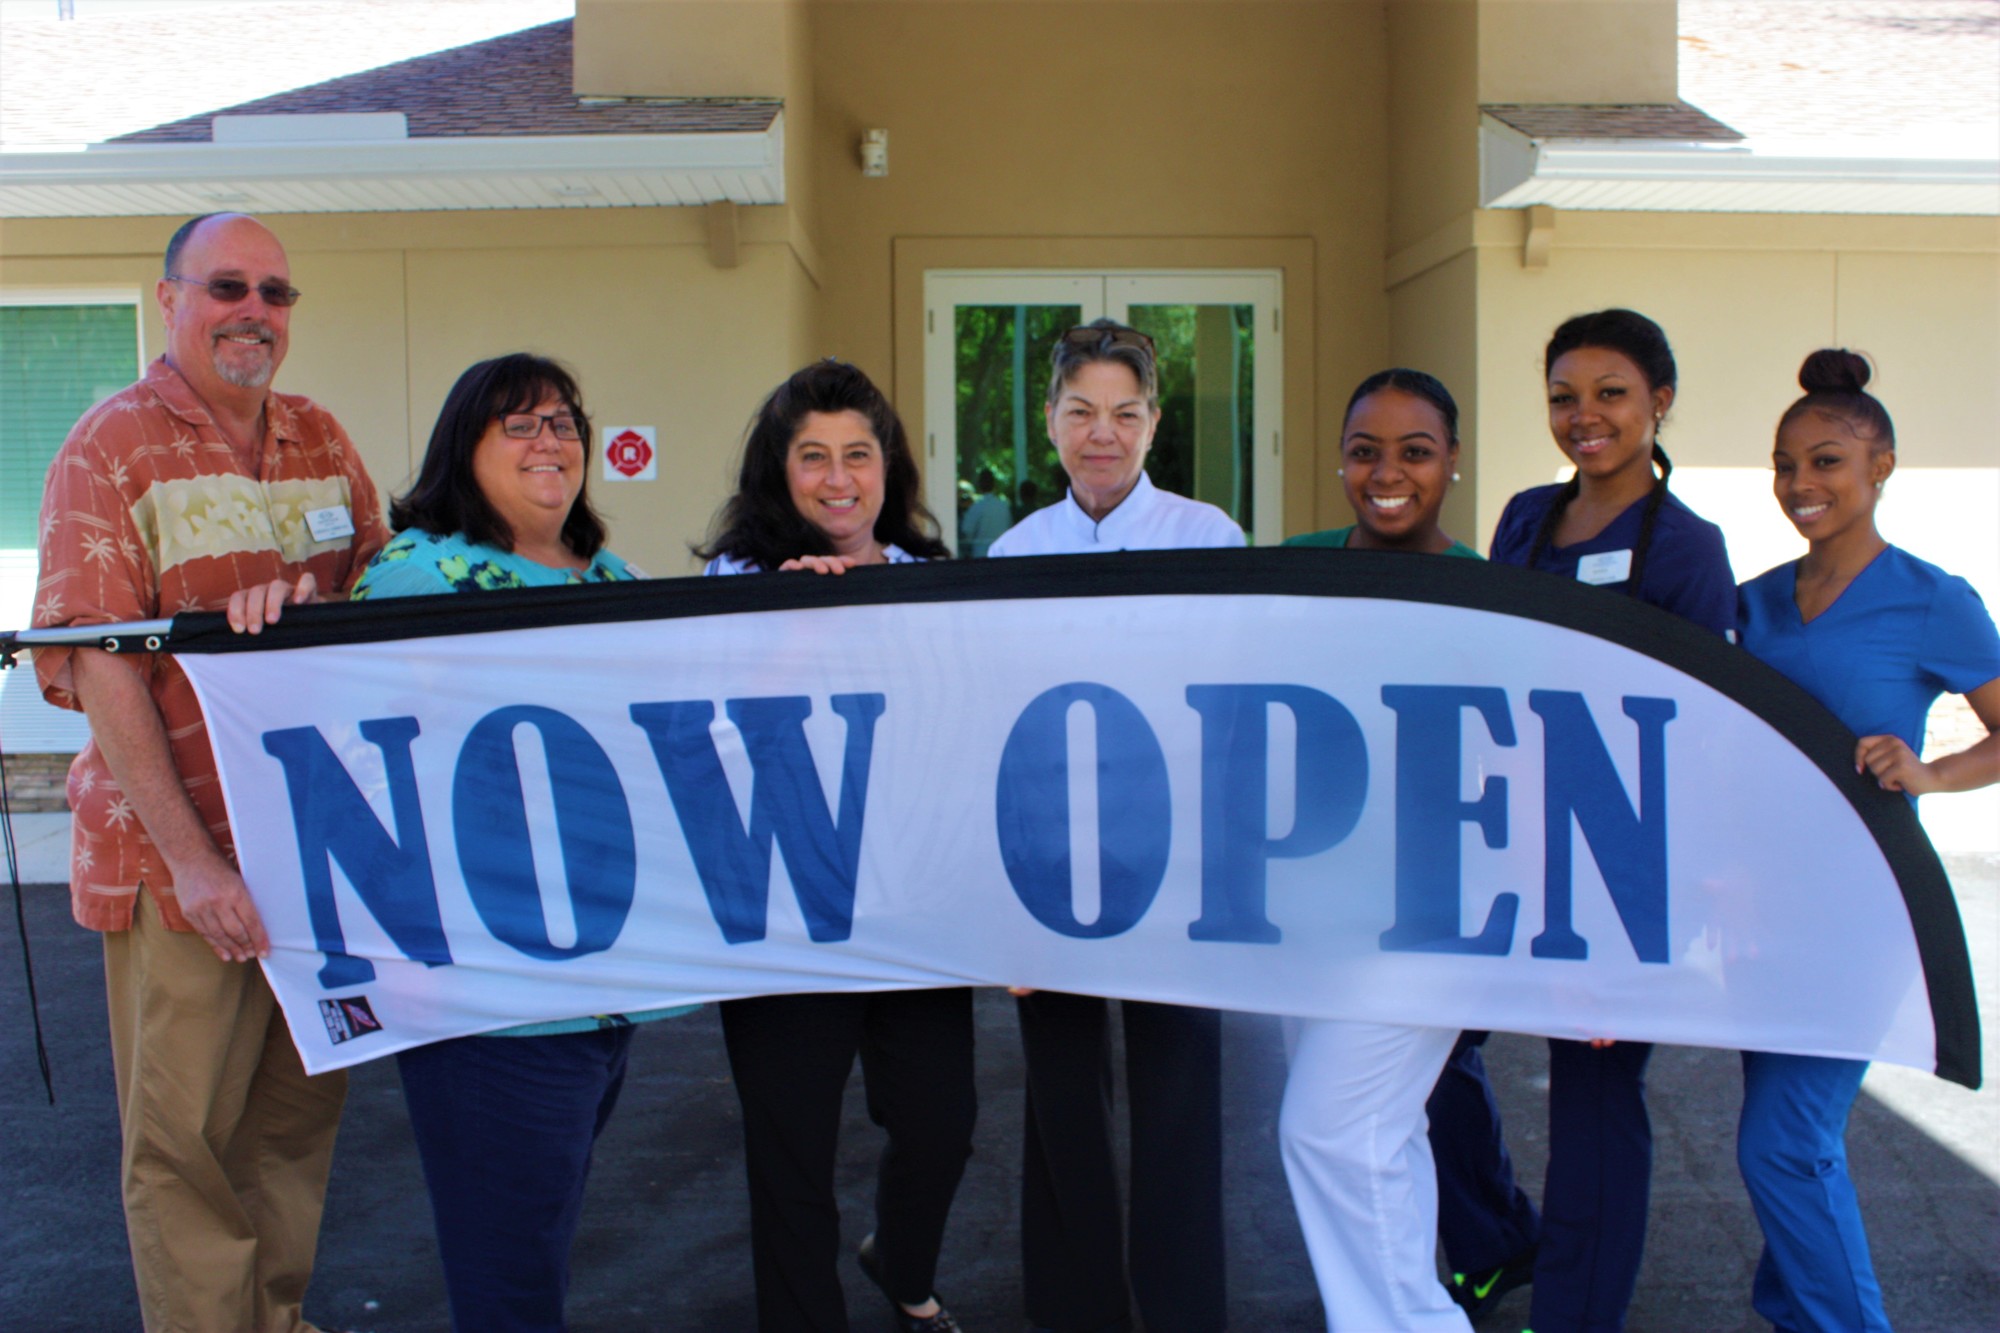 Ormond Manor has opened on Sterthaus Drive, completing a son’s goal. Shown are Dr. Gordon Forbes, Jody Moll, Maryanna Hilton, Sarah Schmezer, Ashley White, Markeia Hayes and Jalisa Spencer. 